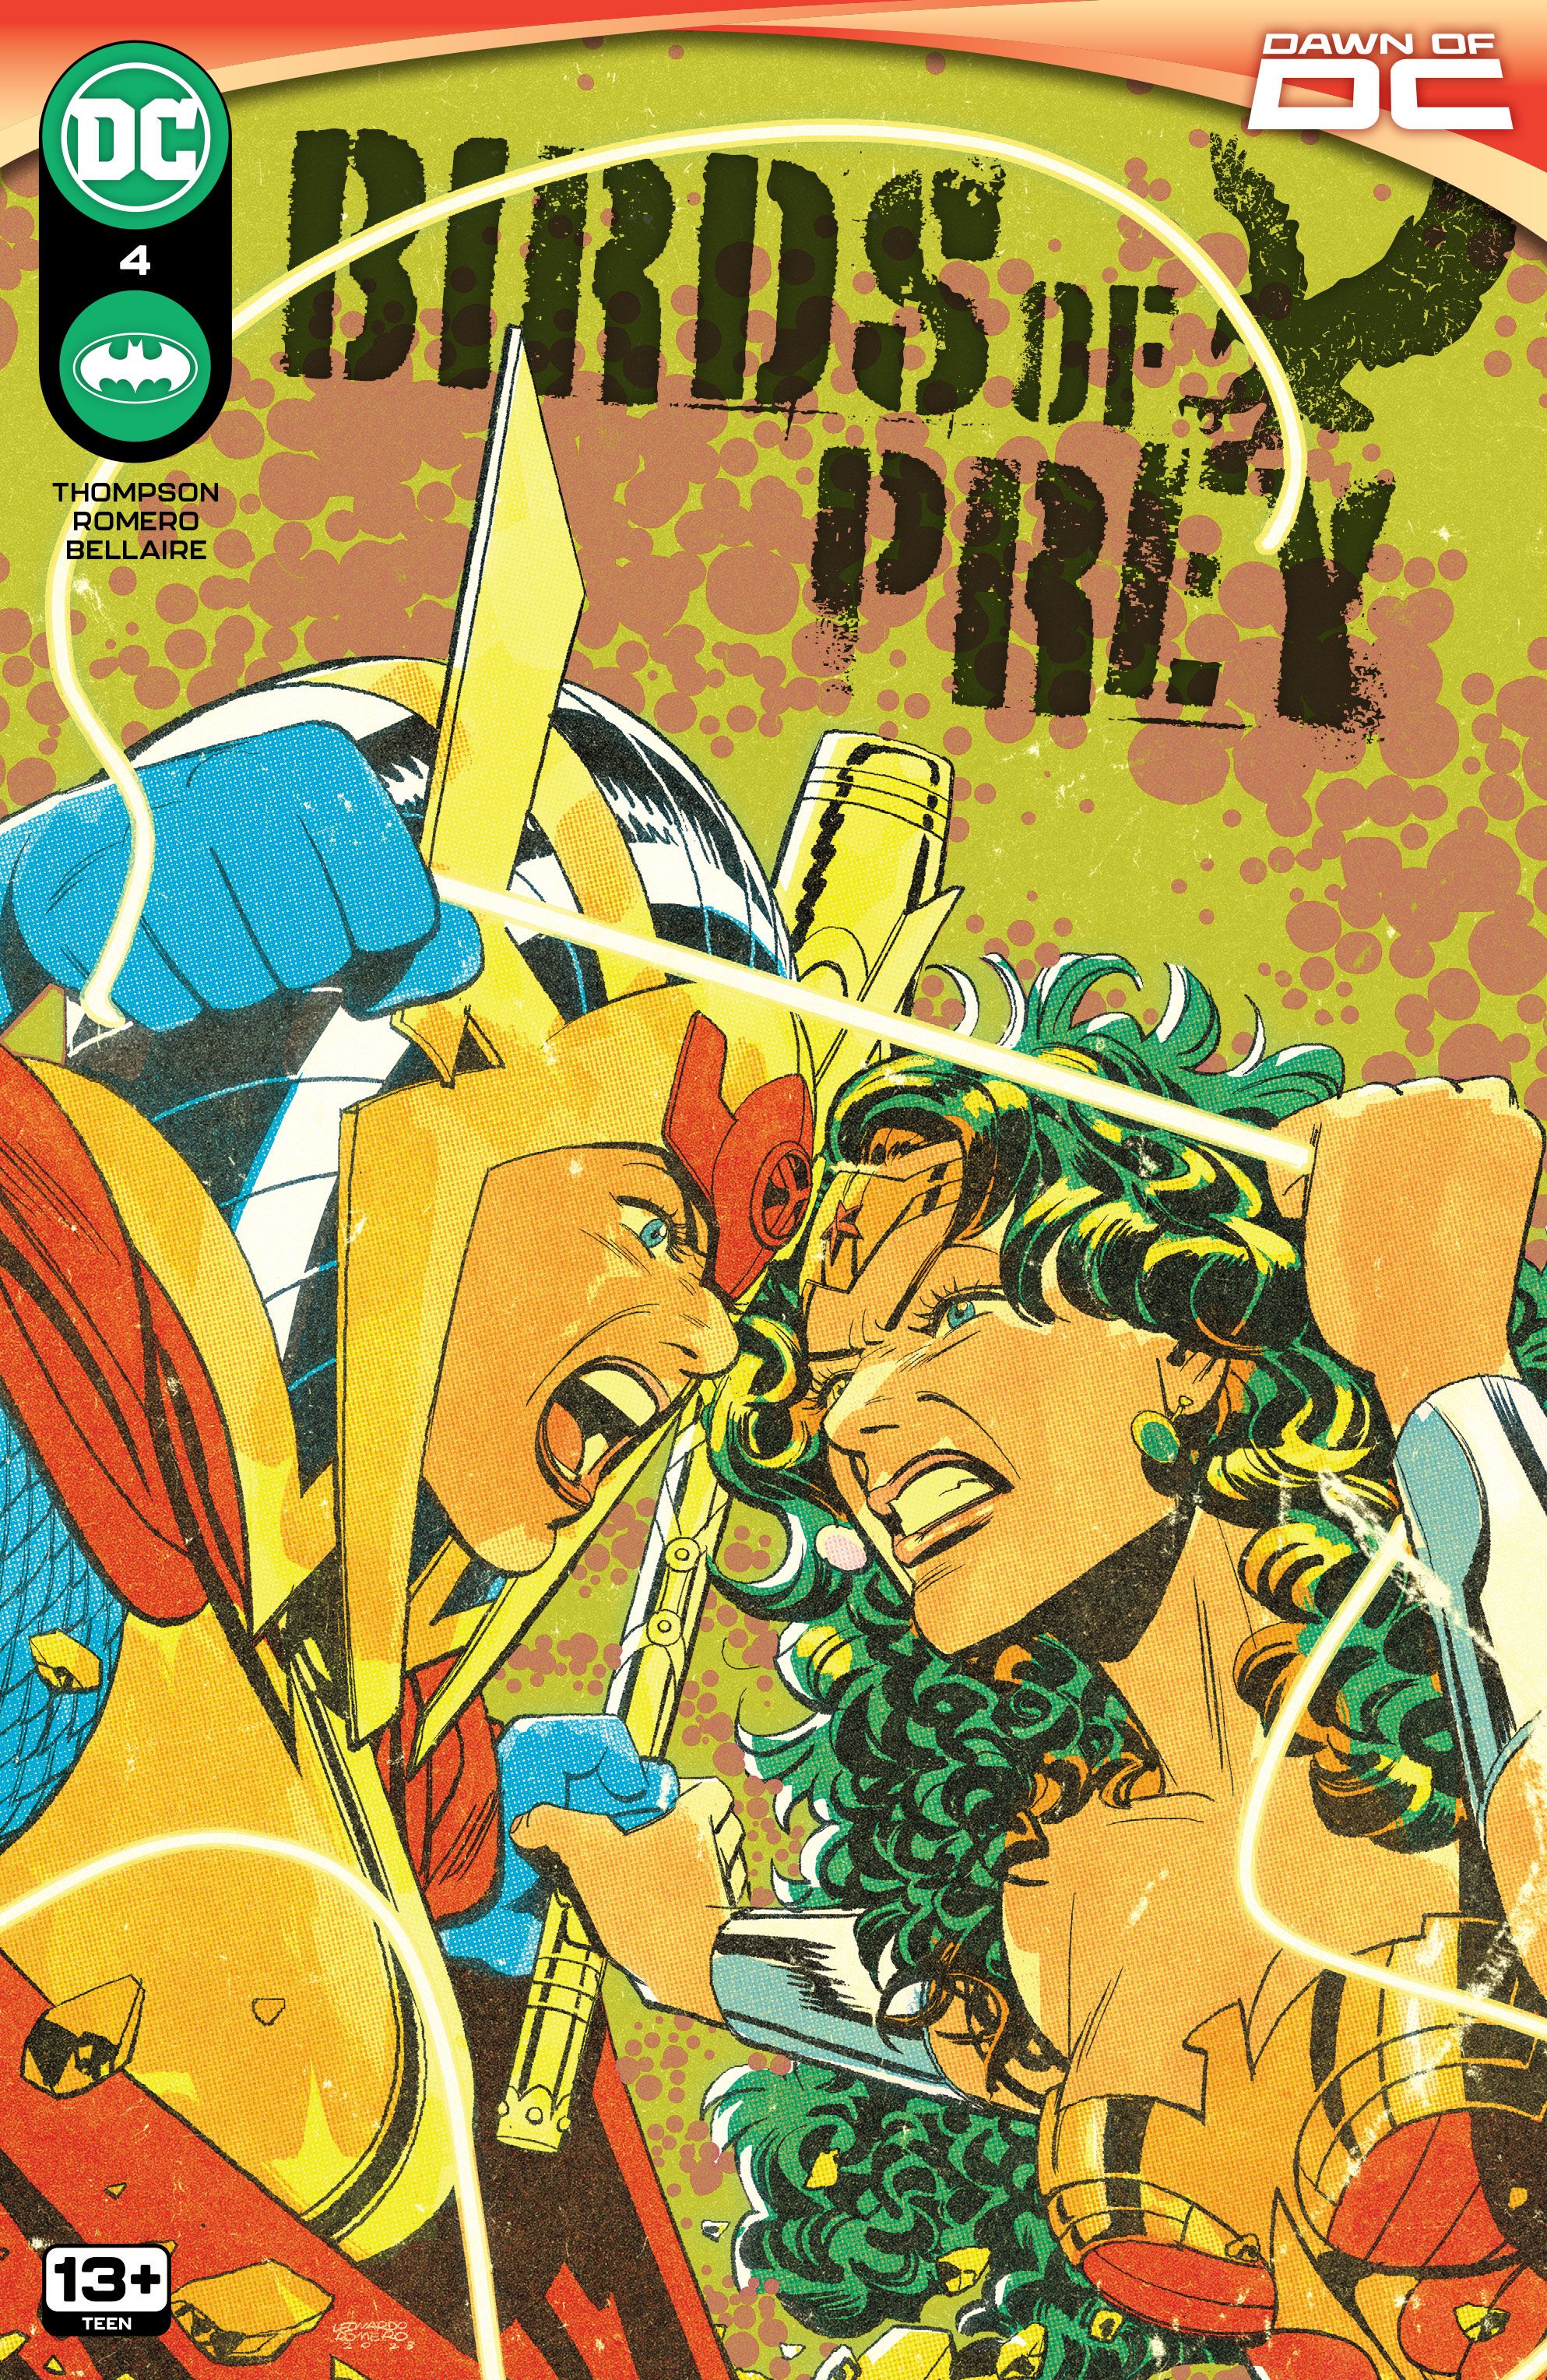 Birds of Prey 4 Main Cover: Costumed superheroes (Big Barda and Wonder Woman) face off with angry faces.